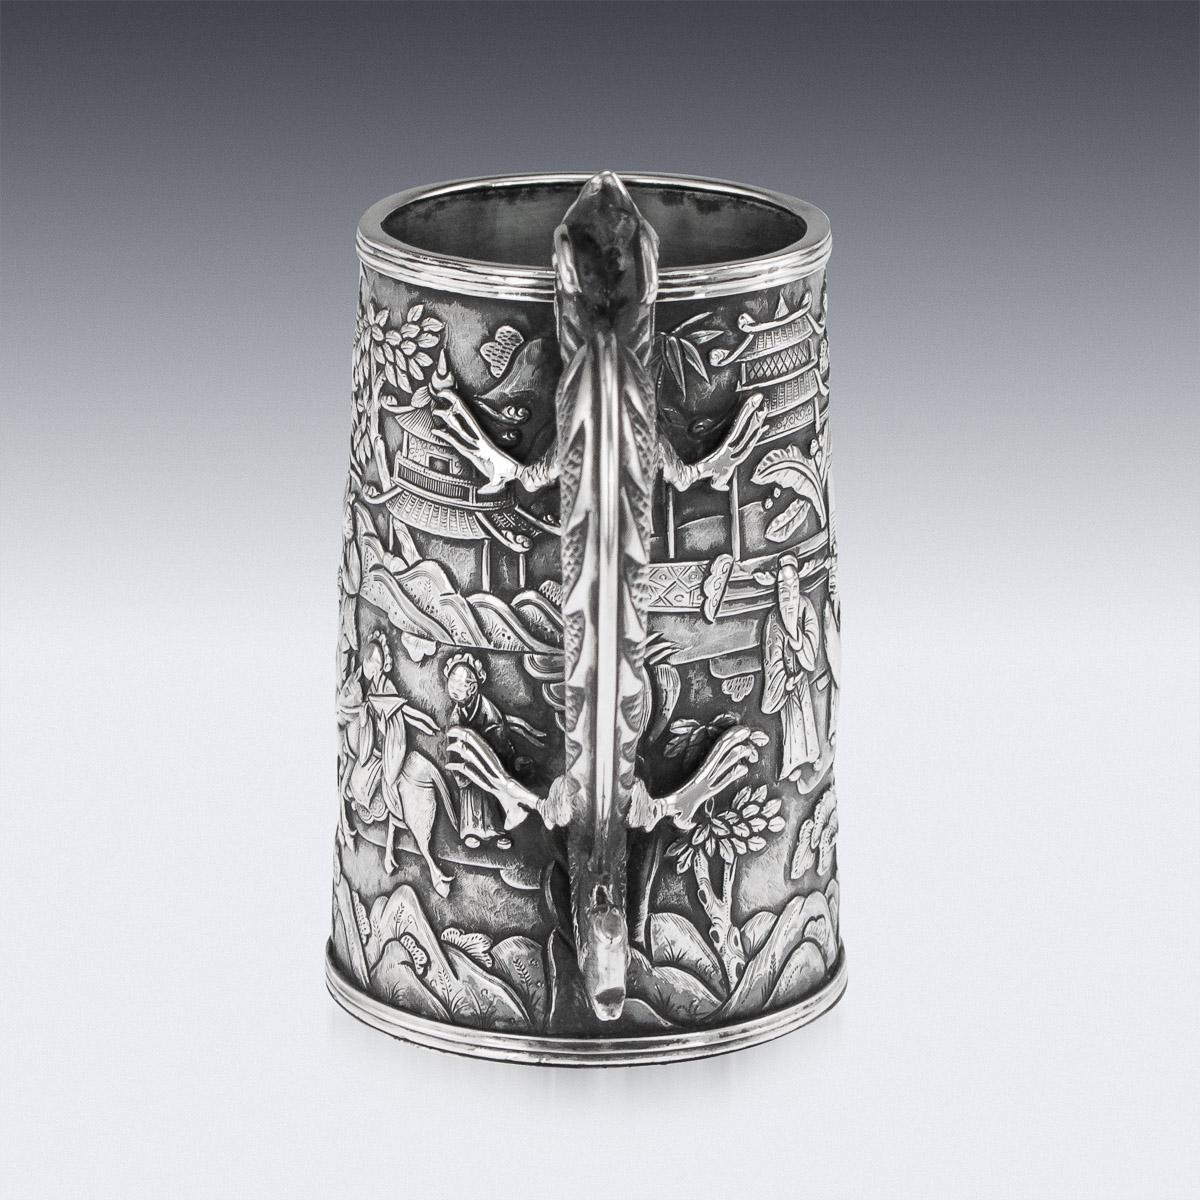 19th Century 19thC Chinese Export Solid Silver Nobility Scenes Mug, Cutshing, c.1870